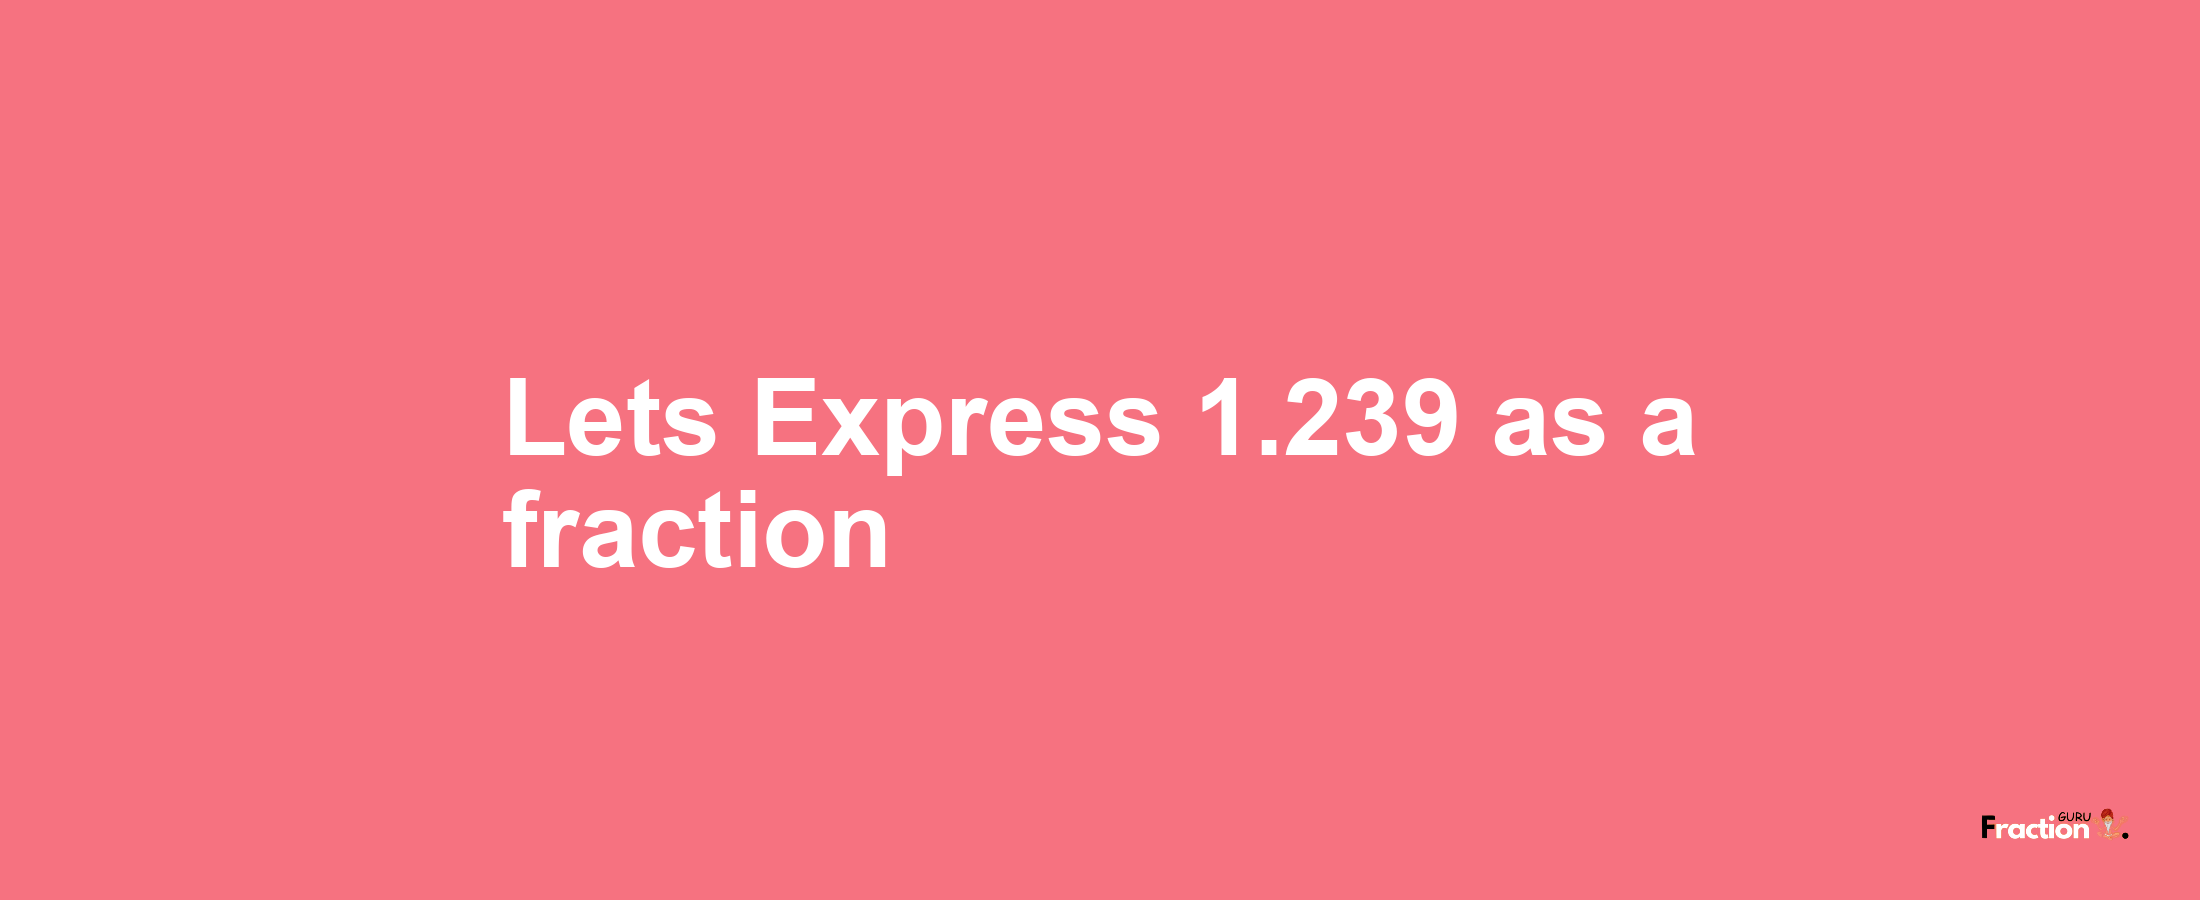 Lets Express 1.239 as afraction